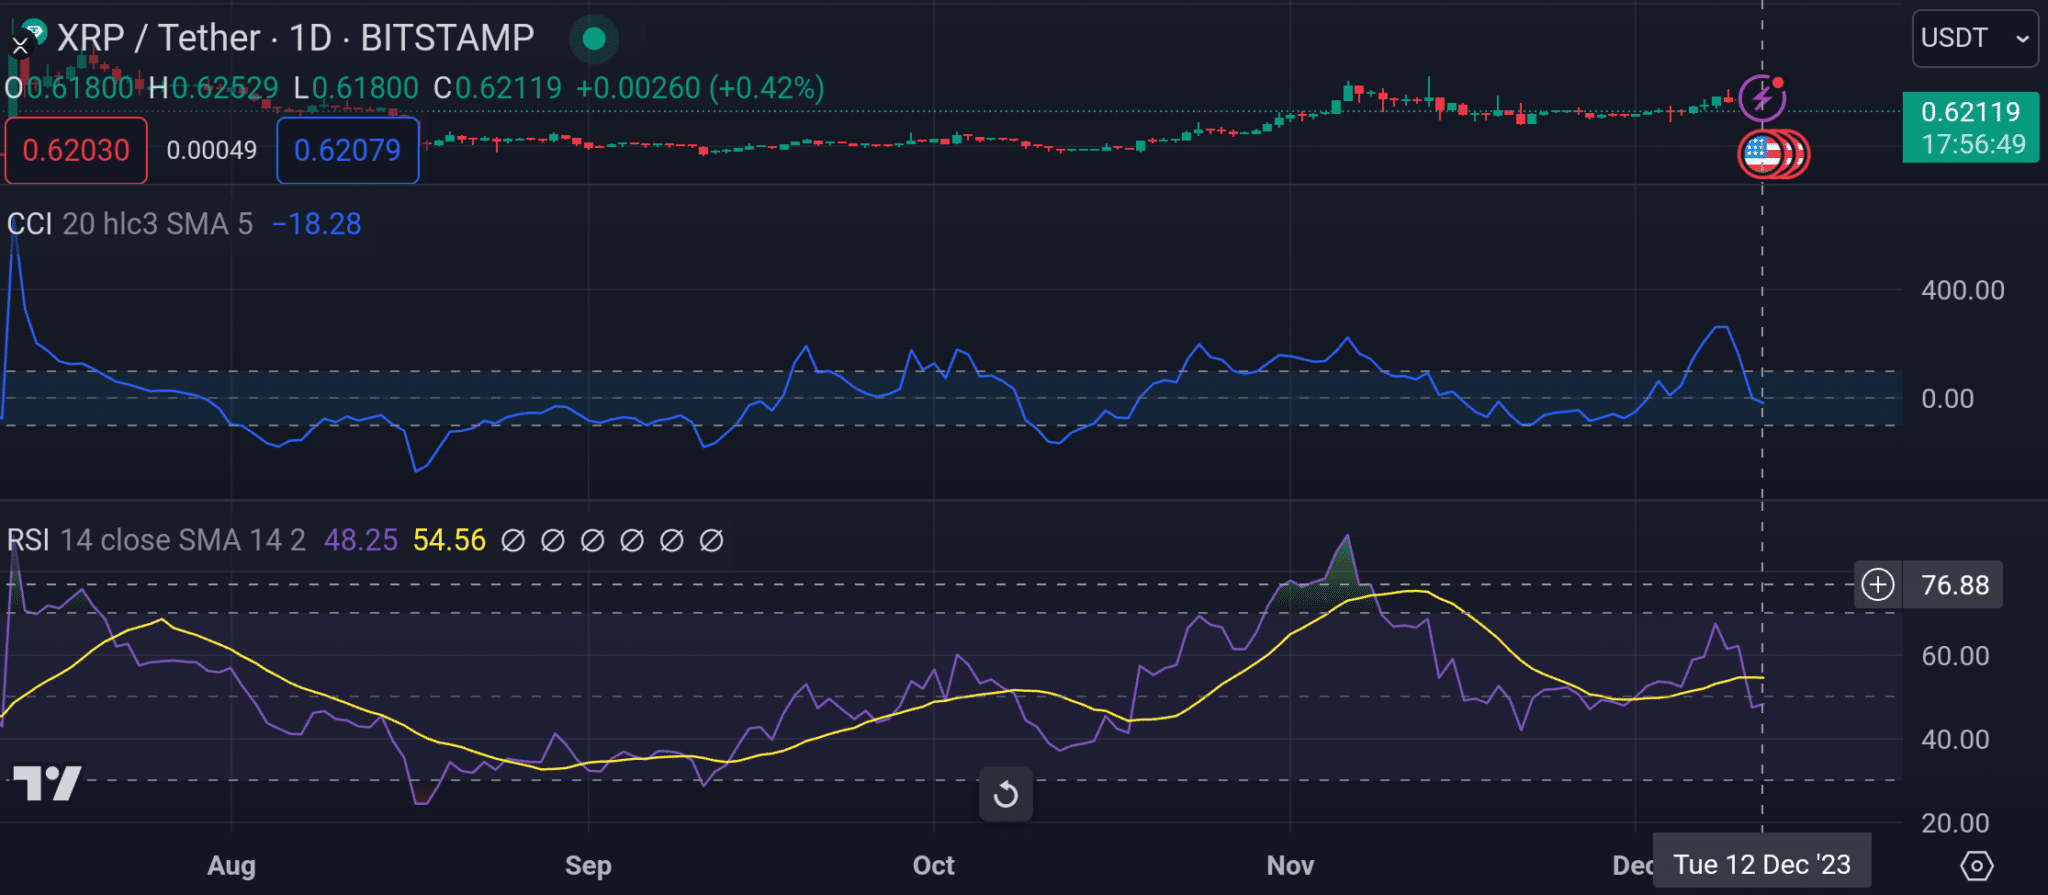 XRP CCI and RSI Entering Oversold Regions